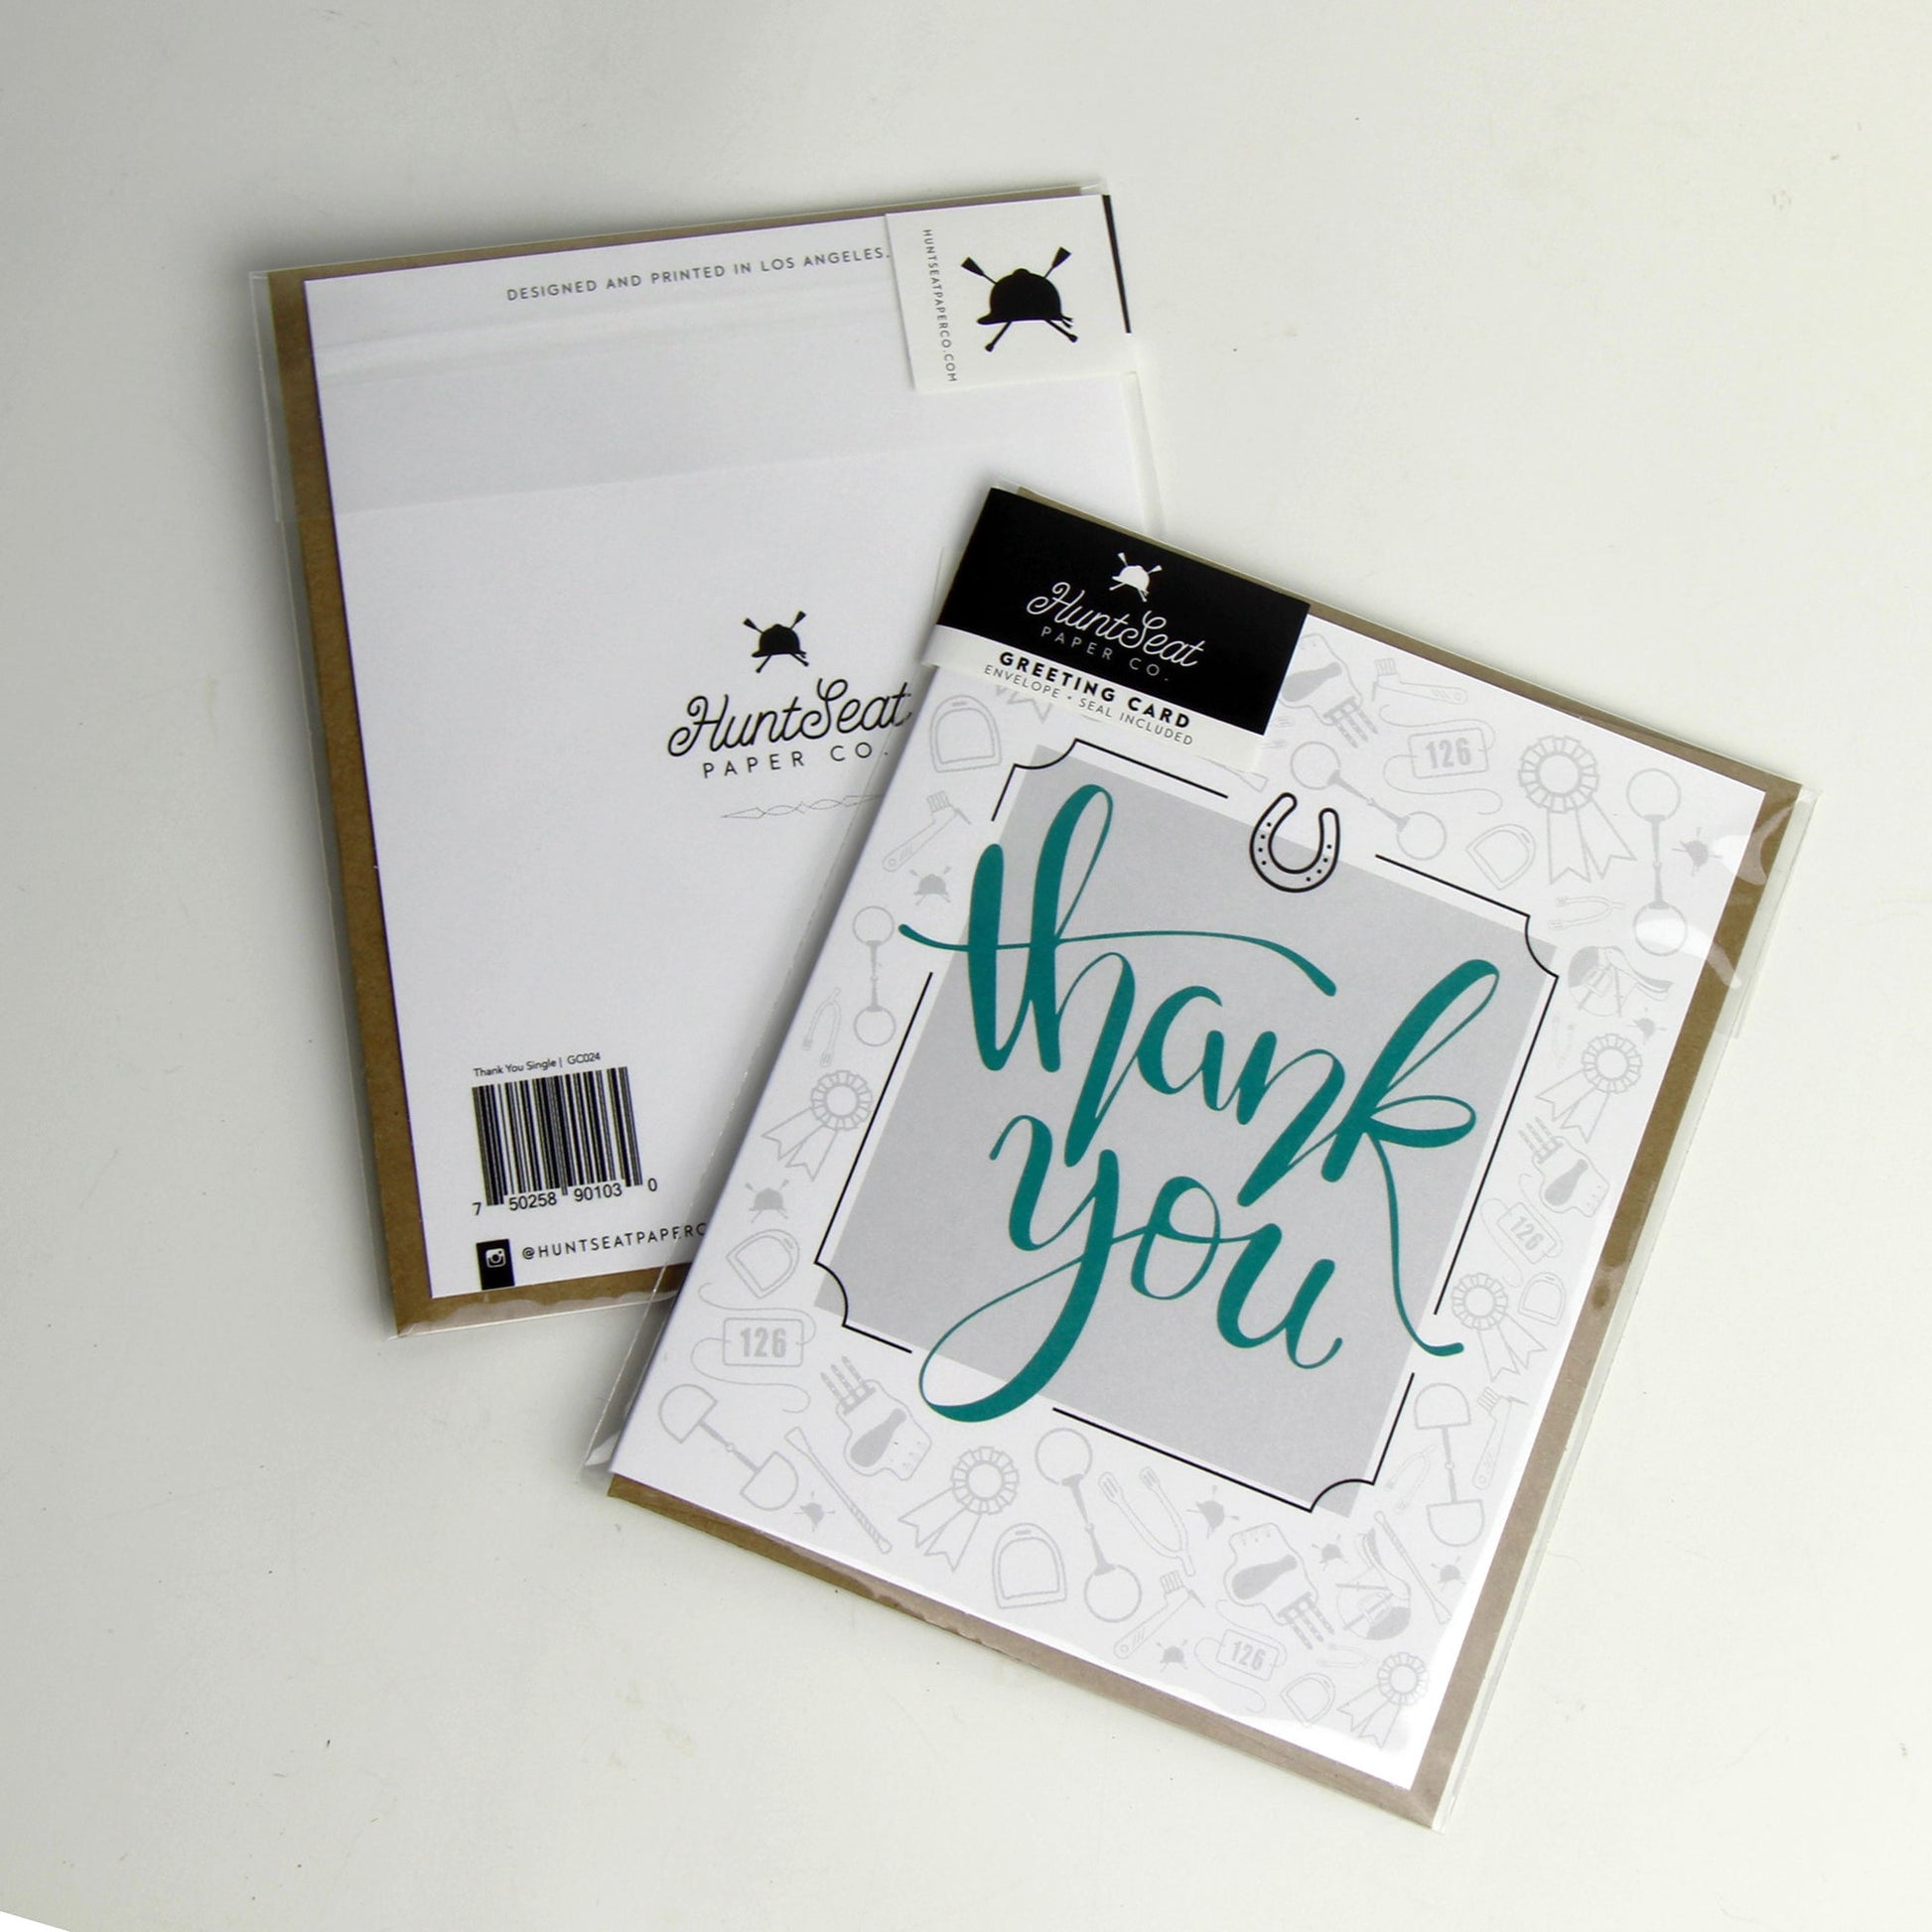 Thank You Greeting Card - Hunt Seat Paper Co.